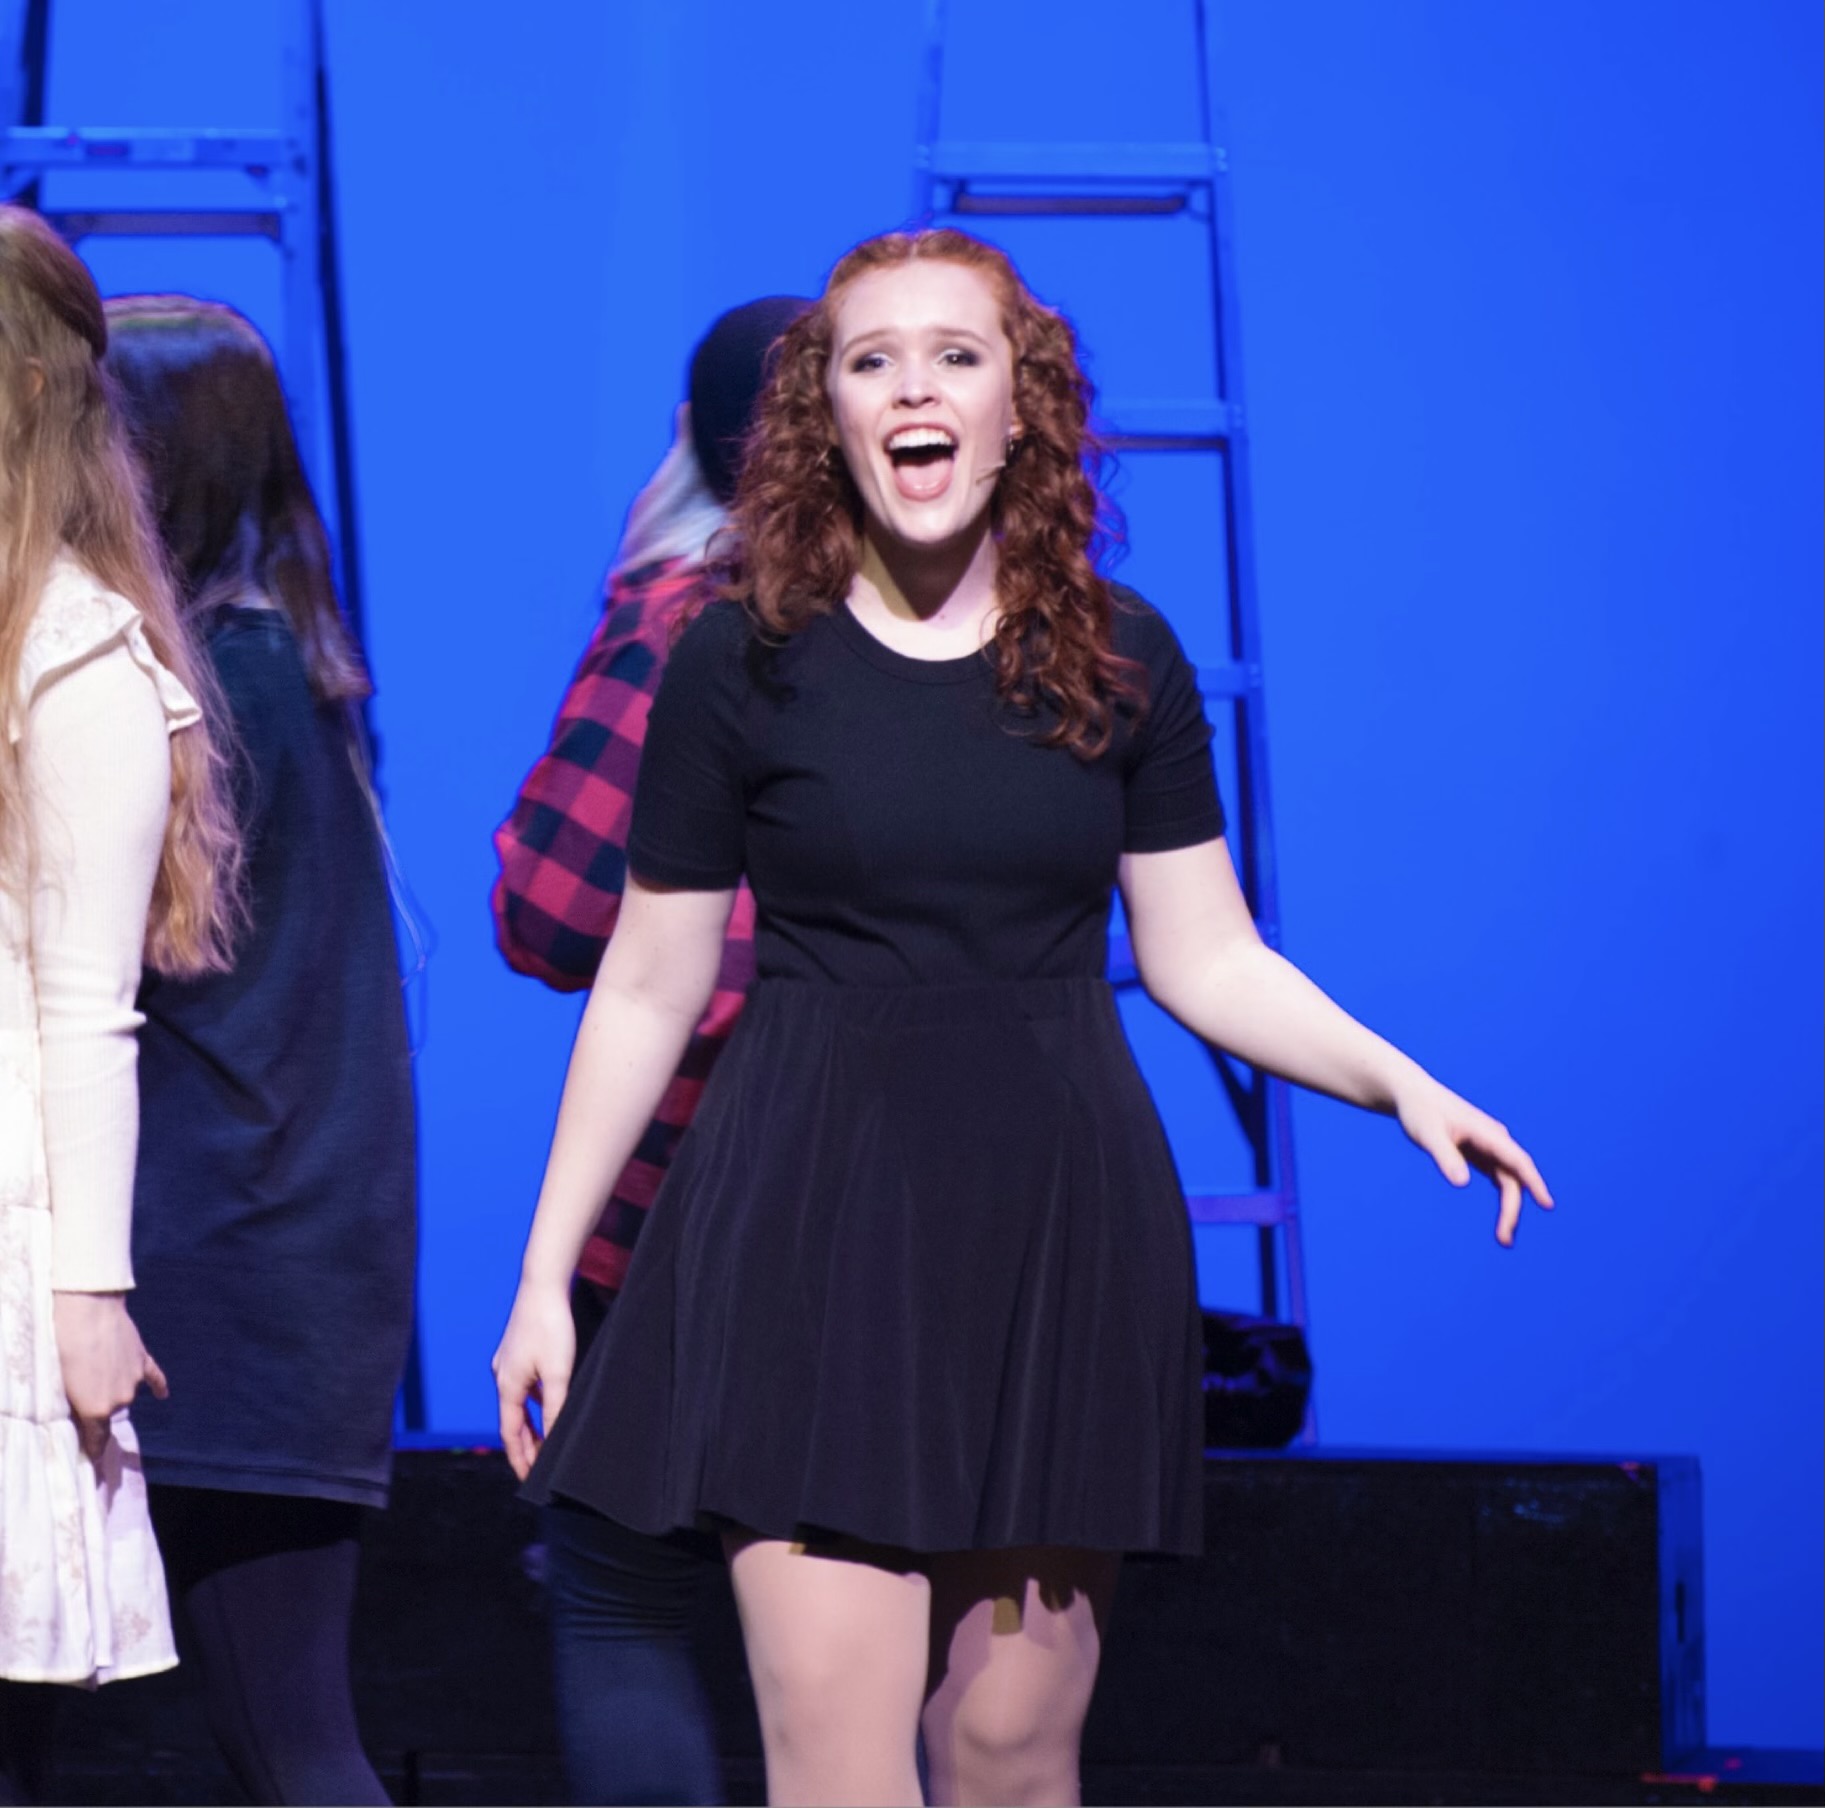 A young person with long curly red hair, a black dress and a headset mic sings onstage in front of a blue backdrop, along with other performers whose faces are not in the frame